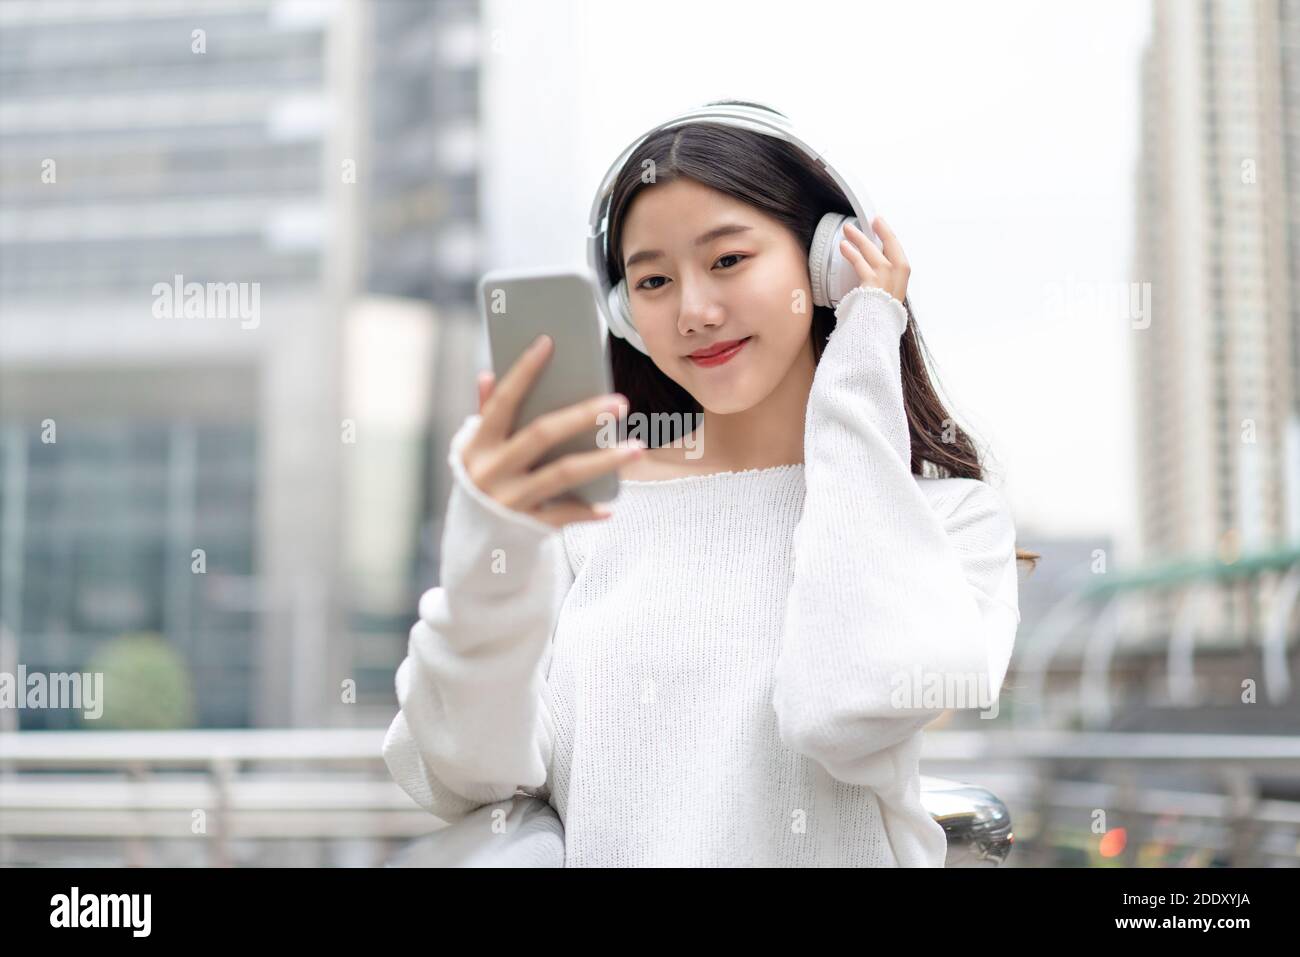 Young Asian girl wearing headphones listening to music online from mobile phone in city building backrgound Stock Photo